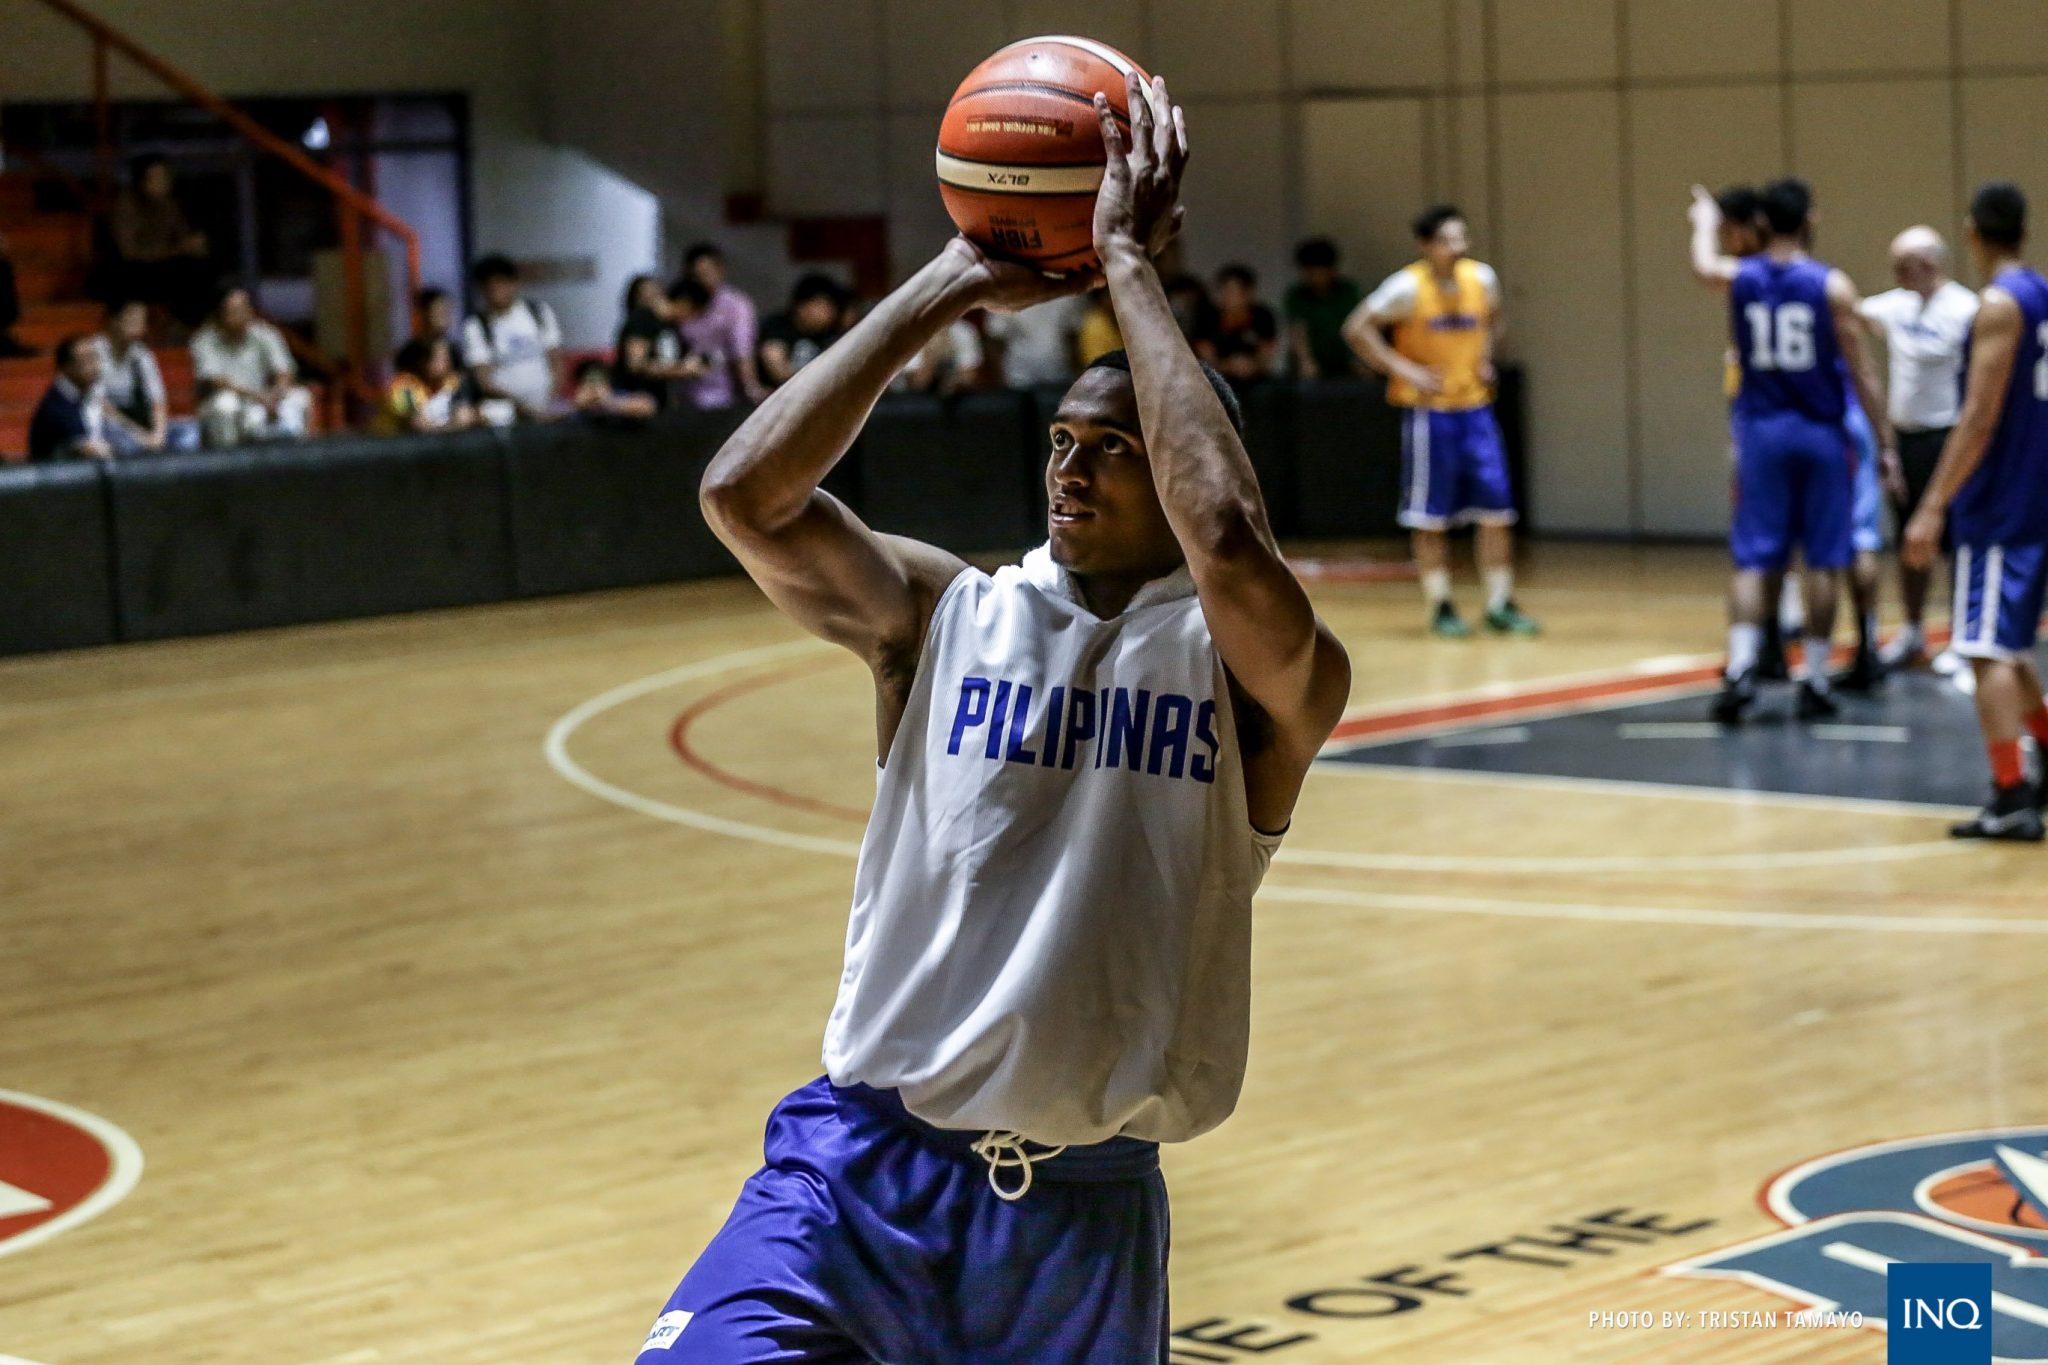 Clarkson says Gilas Pilipinas 'trying to get it together' to gift